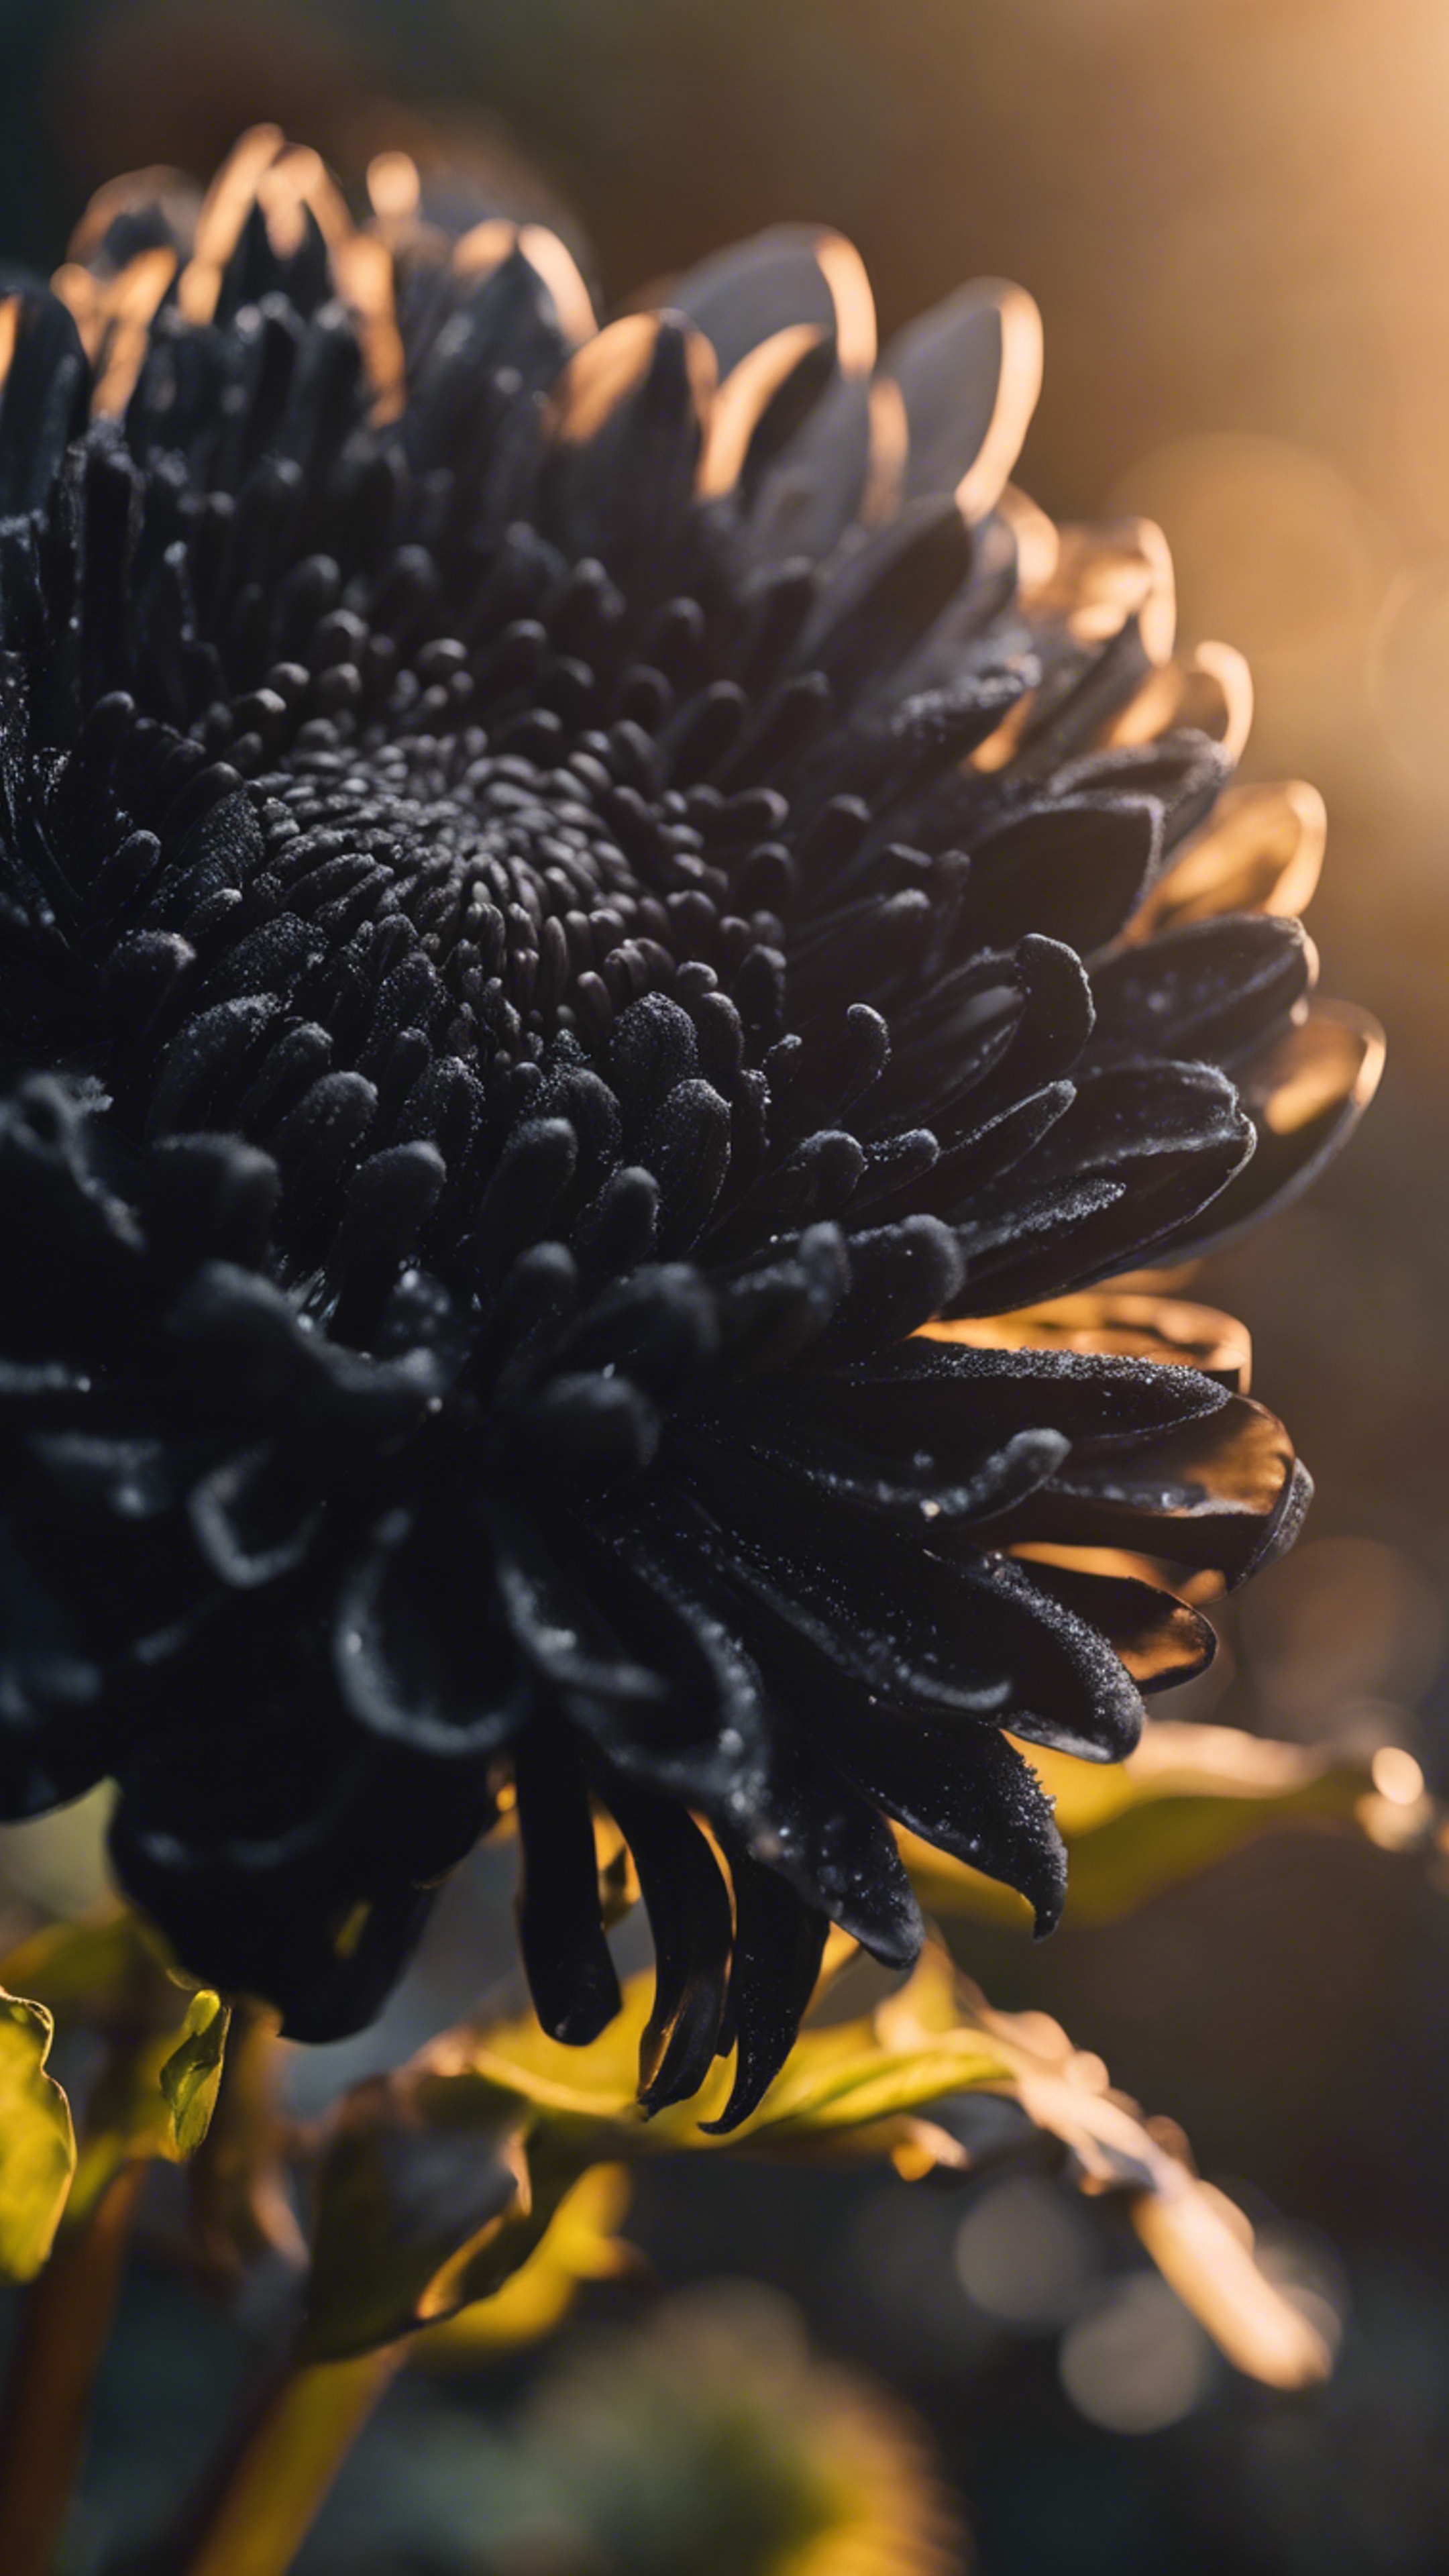 An ethereal black chrysanthemum with intricate petals against a backdrop of the setting sun.壁紙[4b40c3df292a42548d77]